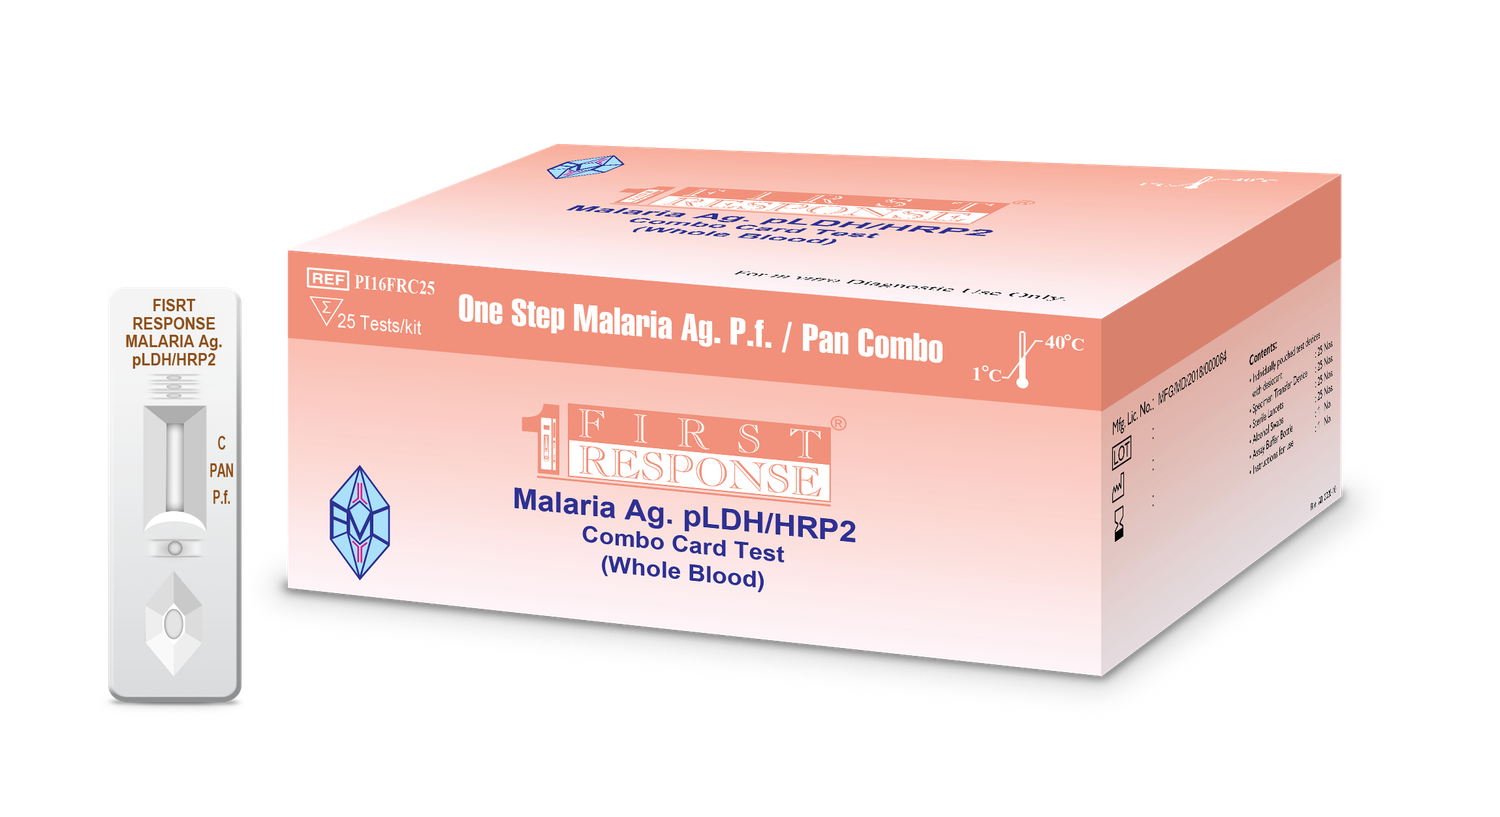 First Response Malaria Ag (pLDH/HRP2) Combo Card Test, Unit: Kit of 25 Tests